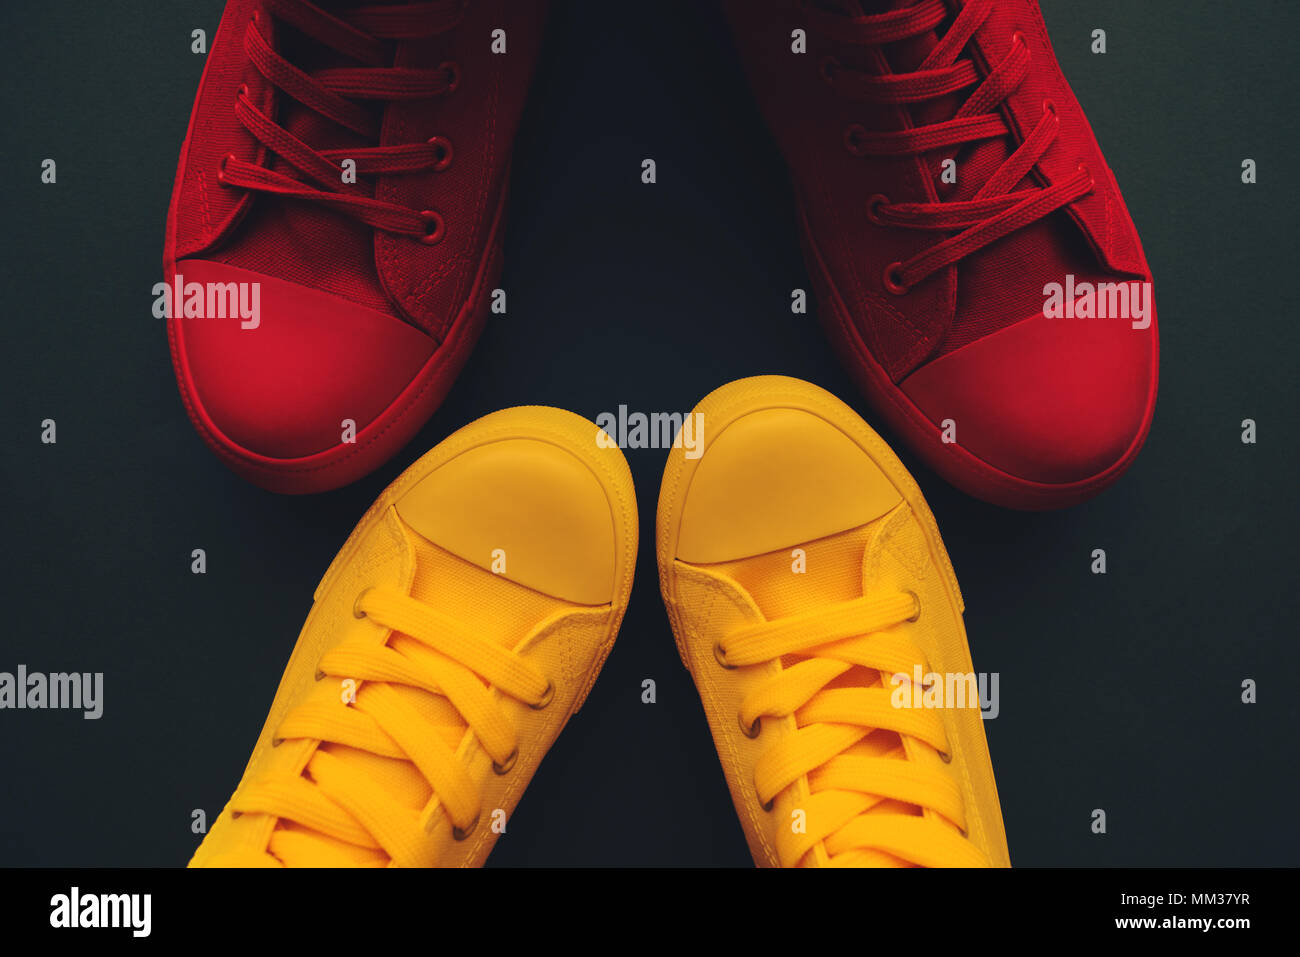 Young couple on a love date, conceptual image. Top view of two pair of casual sneakers, yellow and red, from above close to and facing each other like Stock Photo